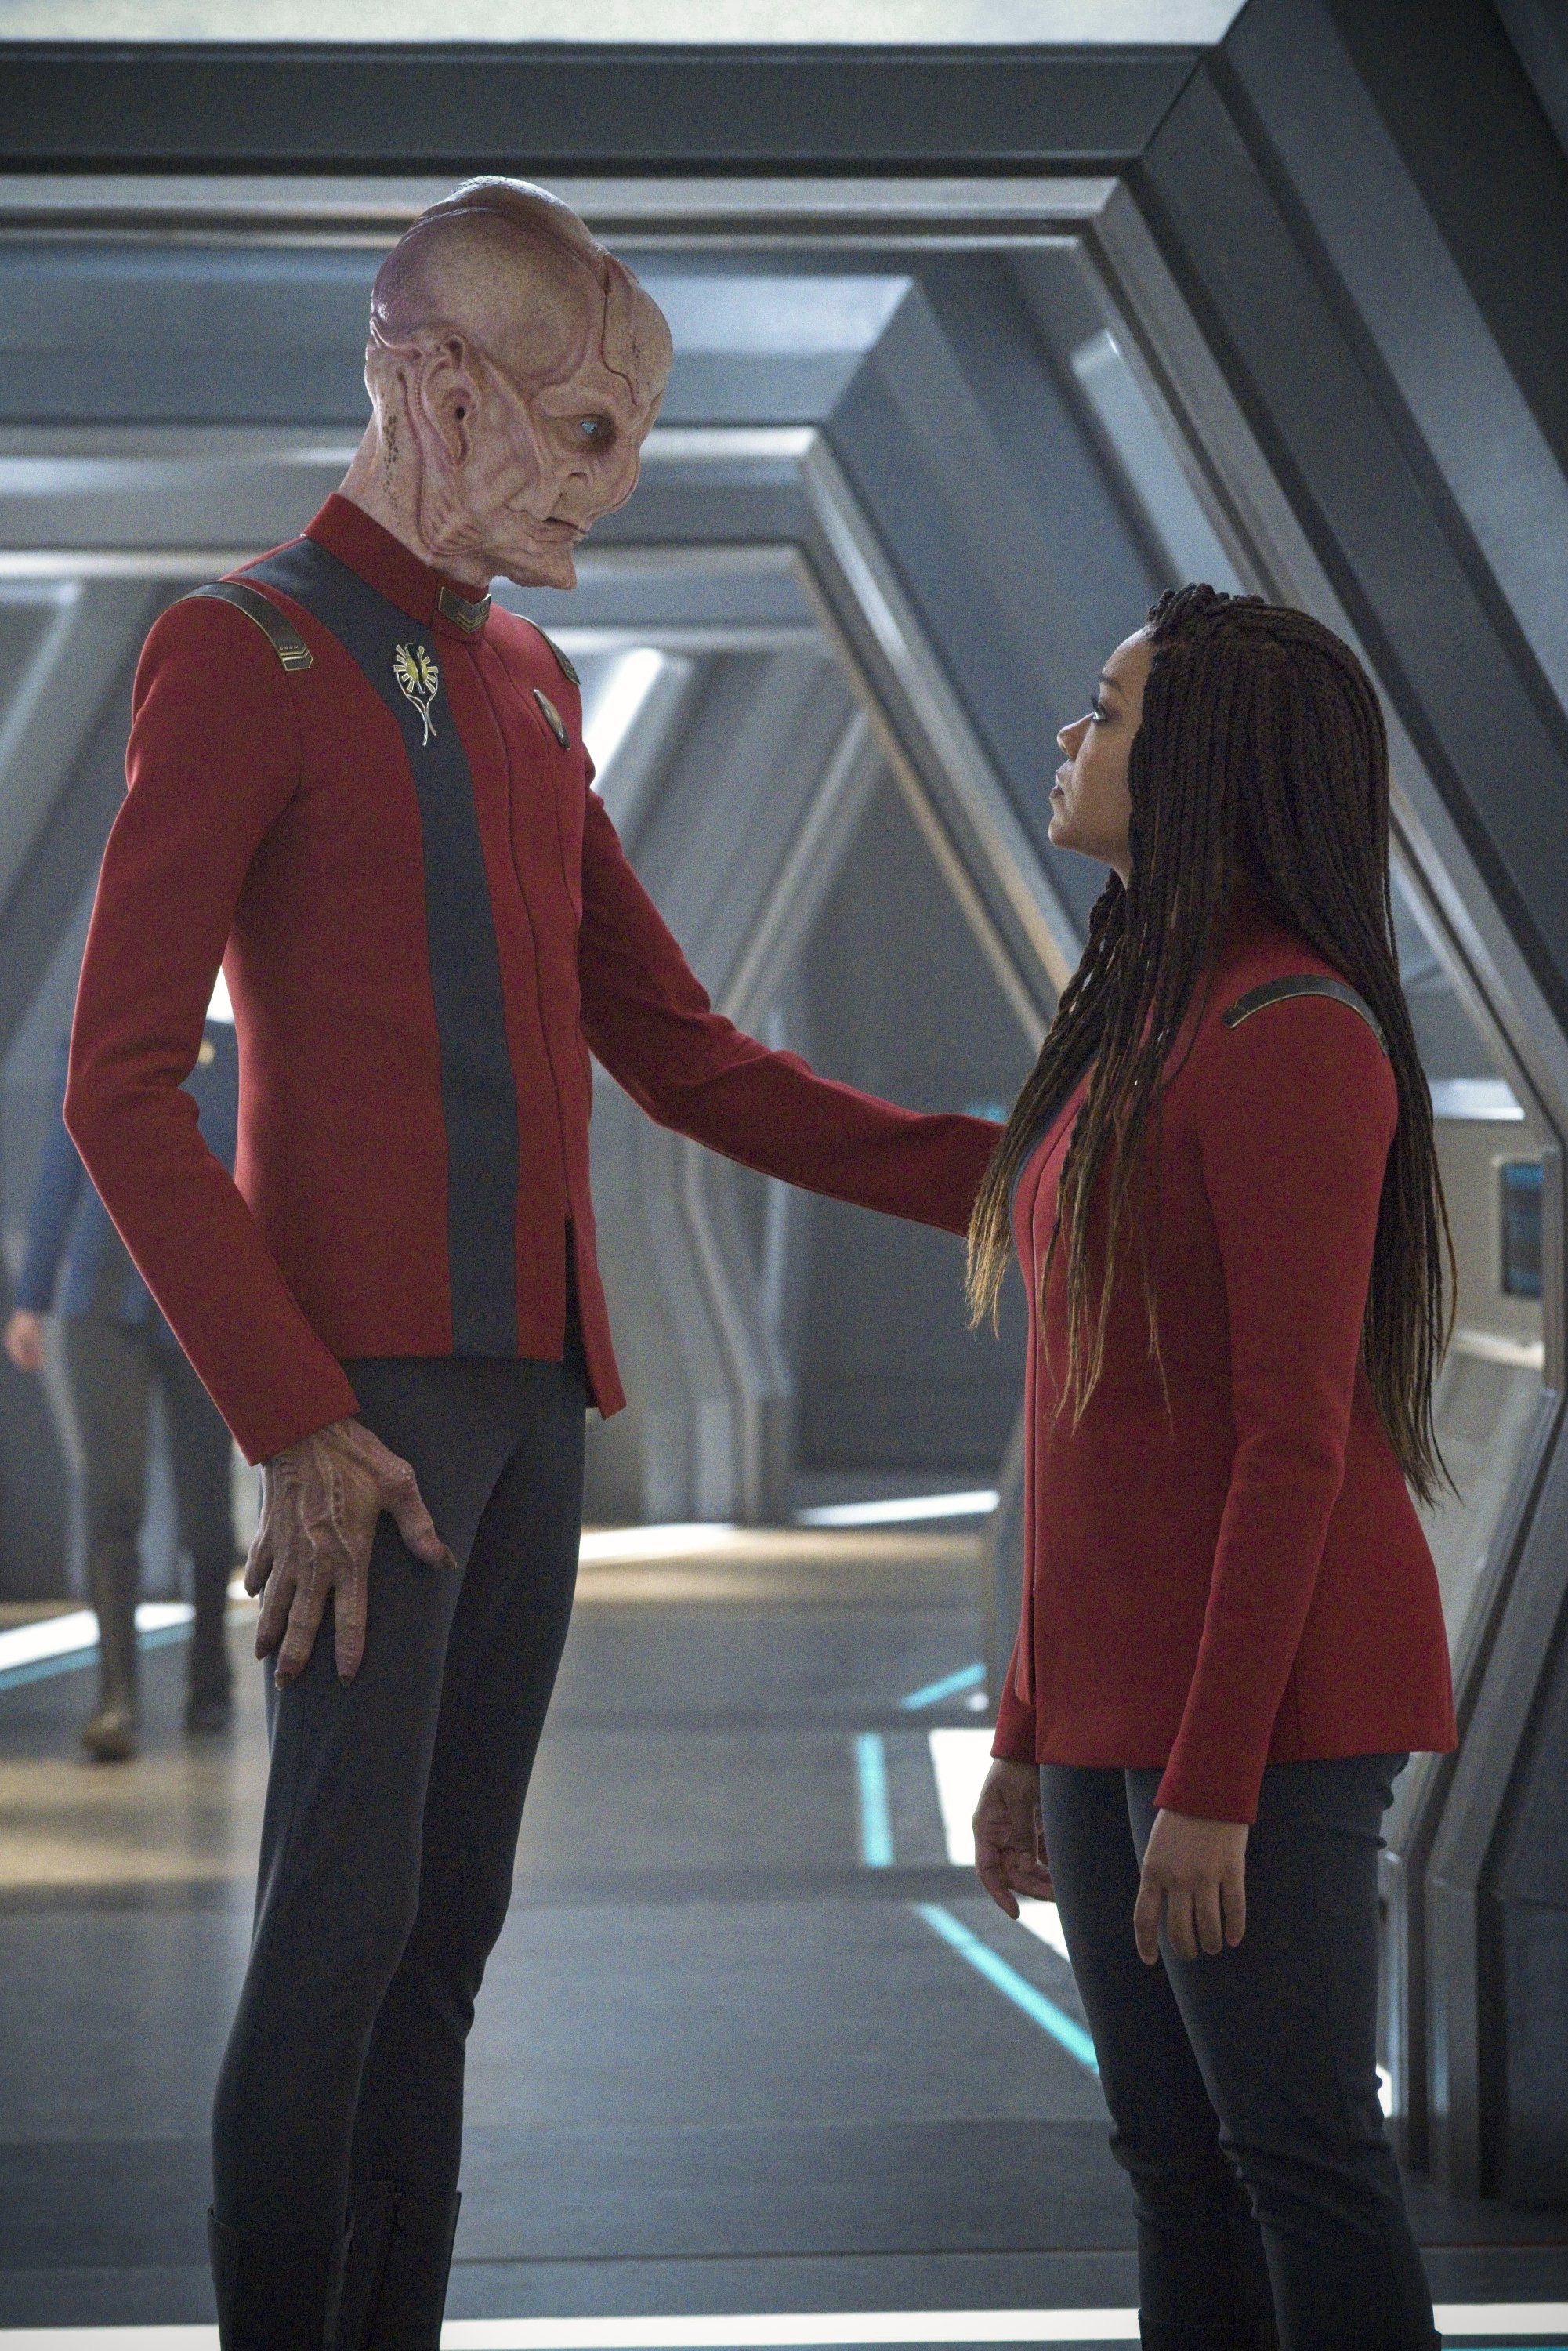   Pictured: Doug Jones as Saru and Sonequa Martin-Green as Burnham of the Paramount+ original series STAR TREK: DISCOVERY. Photo Cr: Michael Gibson/Paramount+ (C) 2021 CBS Interactive. All Rights Reserved.  